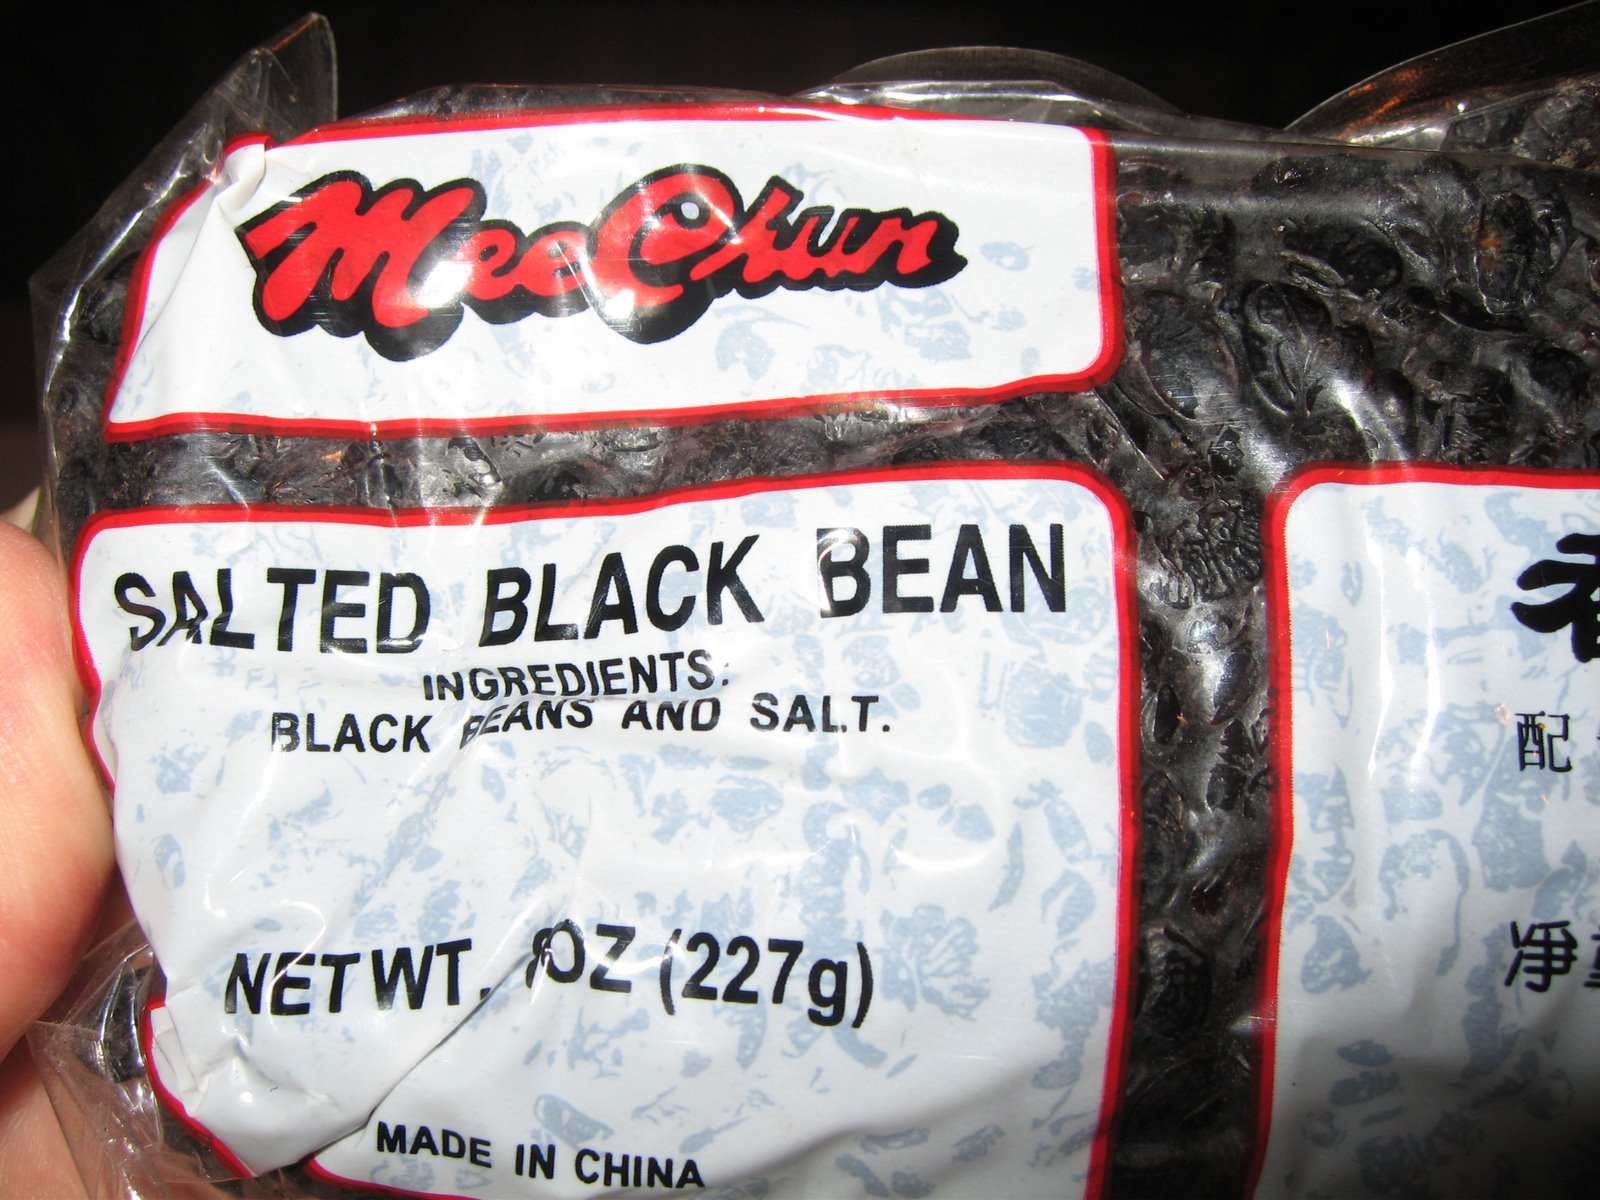 You can only get fermented black beans at an Asian grocery story